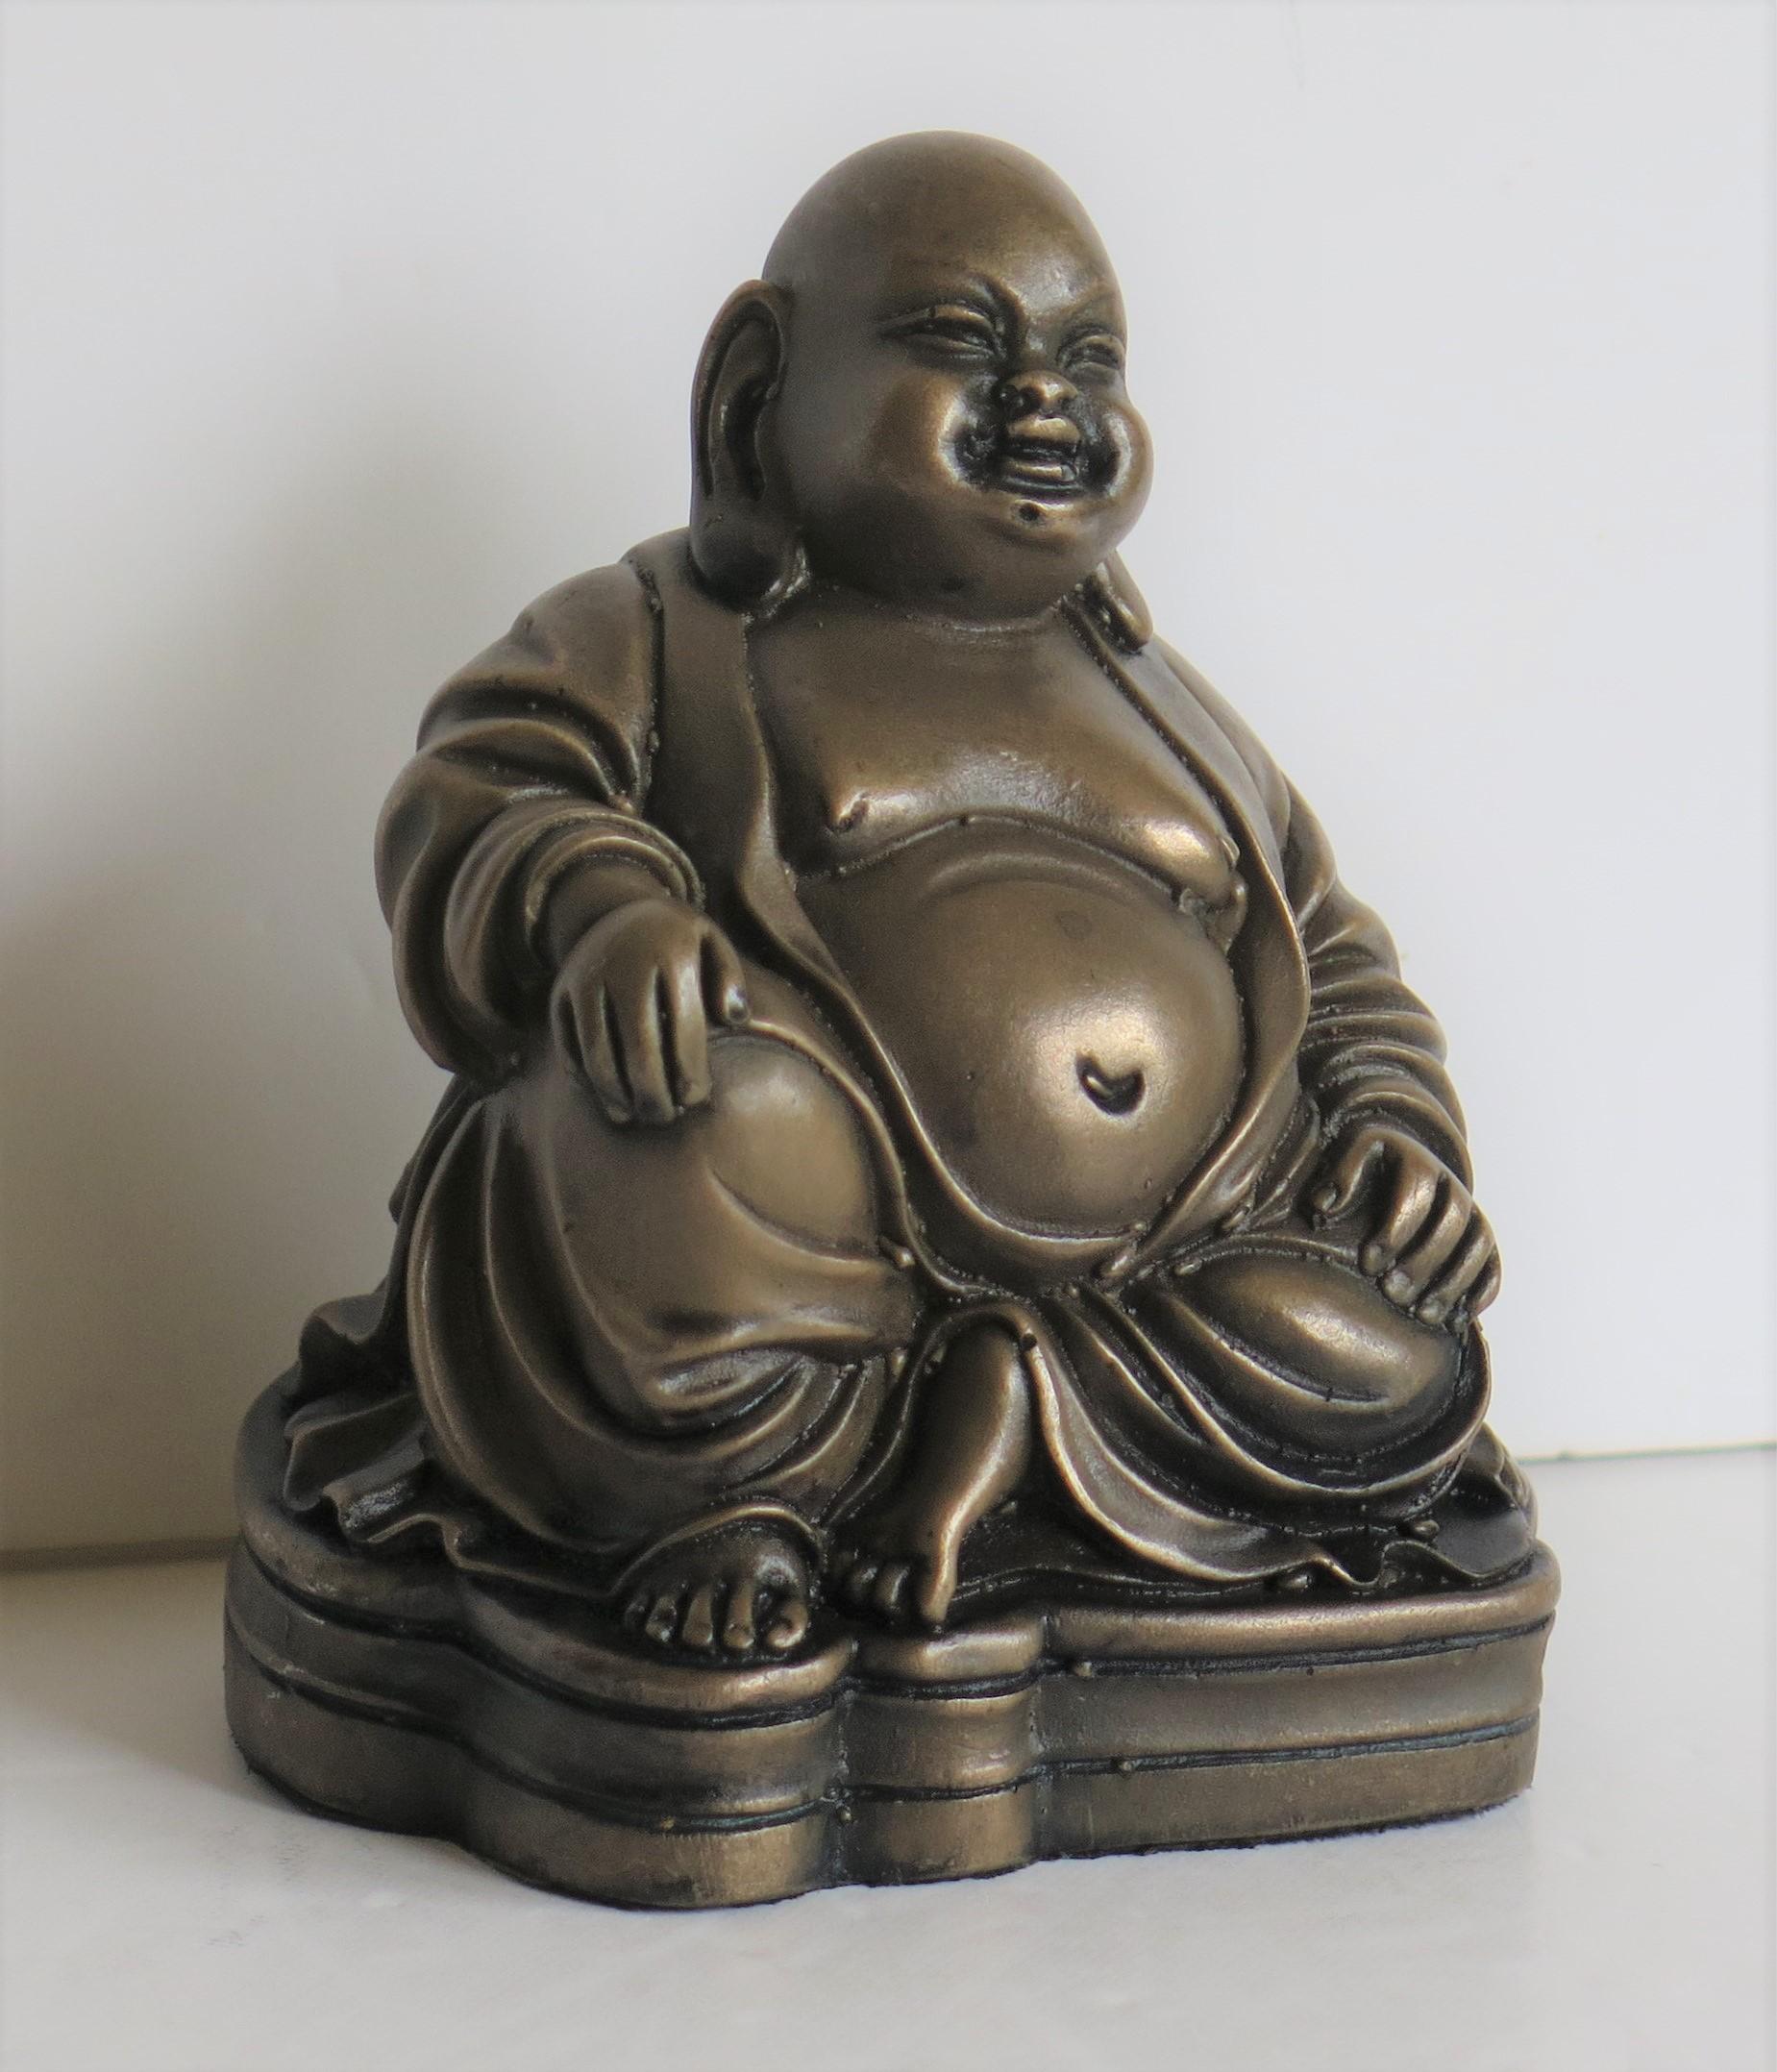 This is a very good small bronze metal statue or sculpture of Buddha in a seated position, possibly Chinese or Japanese, which we date to the first half of the 20th century, circa 1920s.

The small statue is well formed with good detail and more